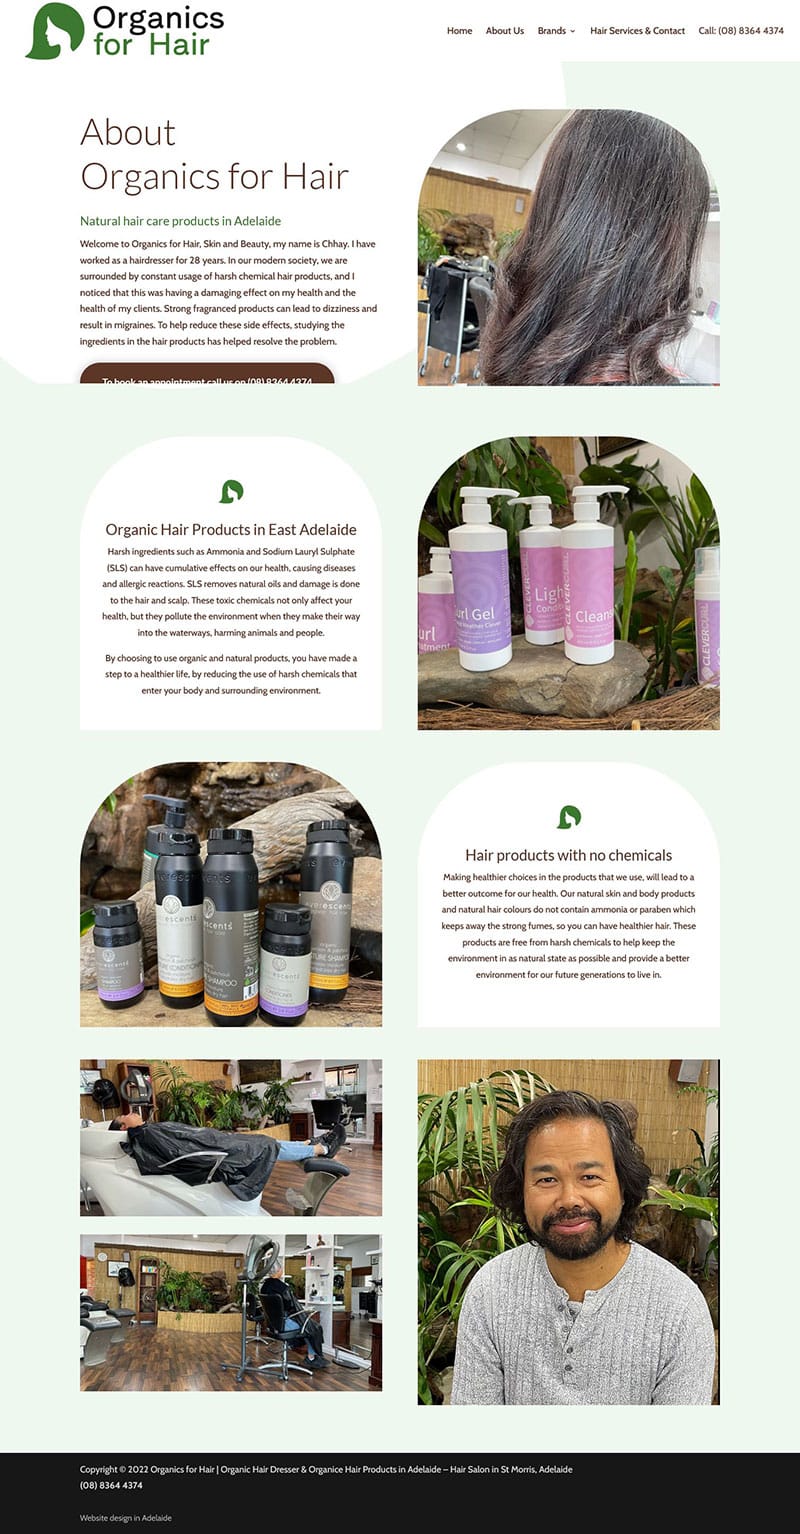 website design for hairdresser in adelaide organic products